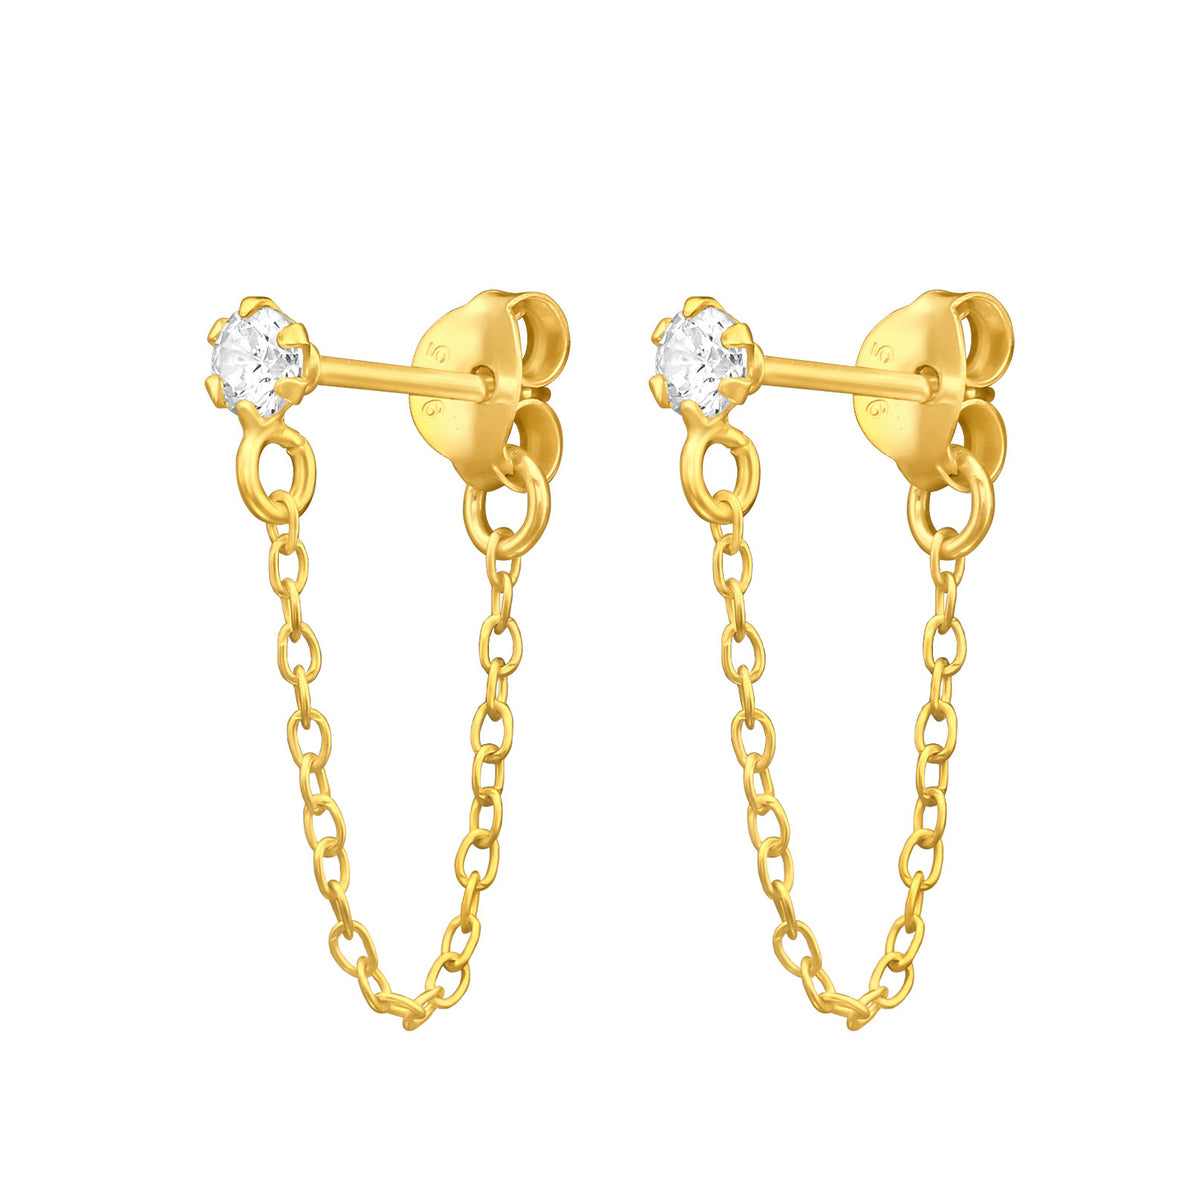 Zirconia Silver Chain Earrings, gold plated